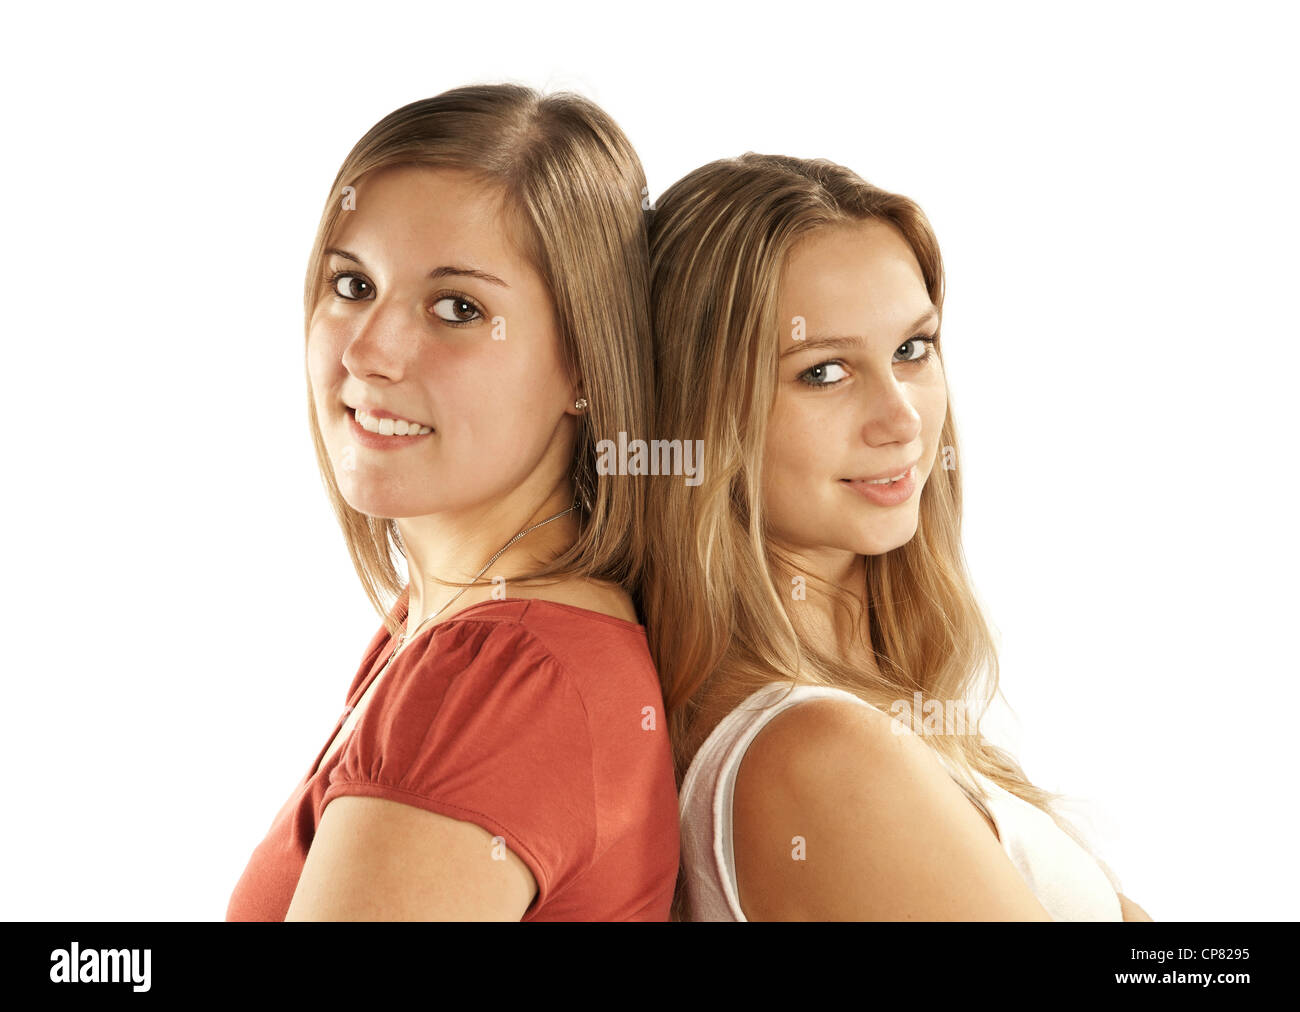 Two pretty young women reclining with their backs to each other. Stock Photo